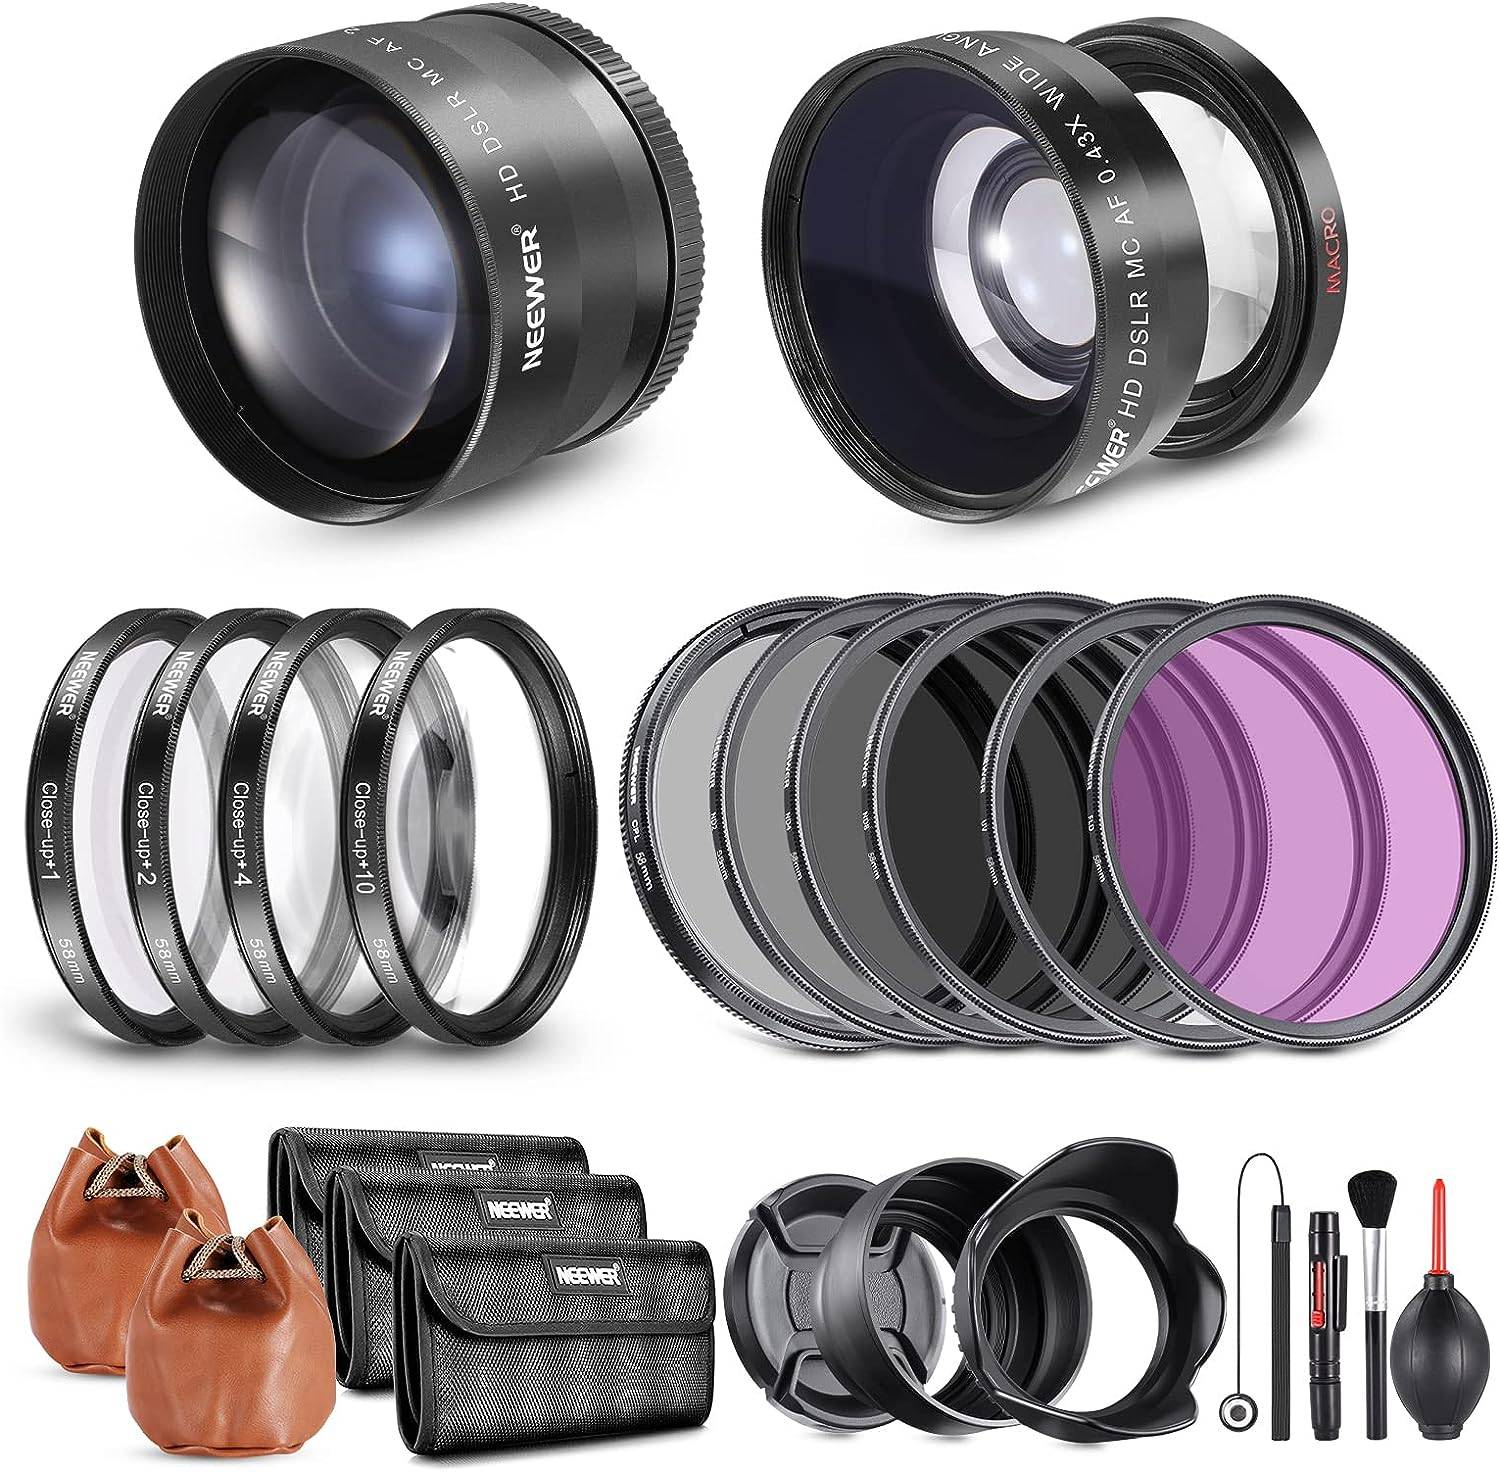 NEEWER 58mm Lens and Filter Set